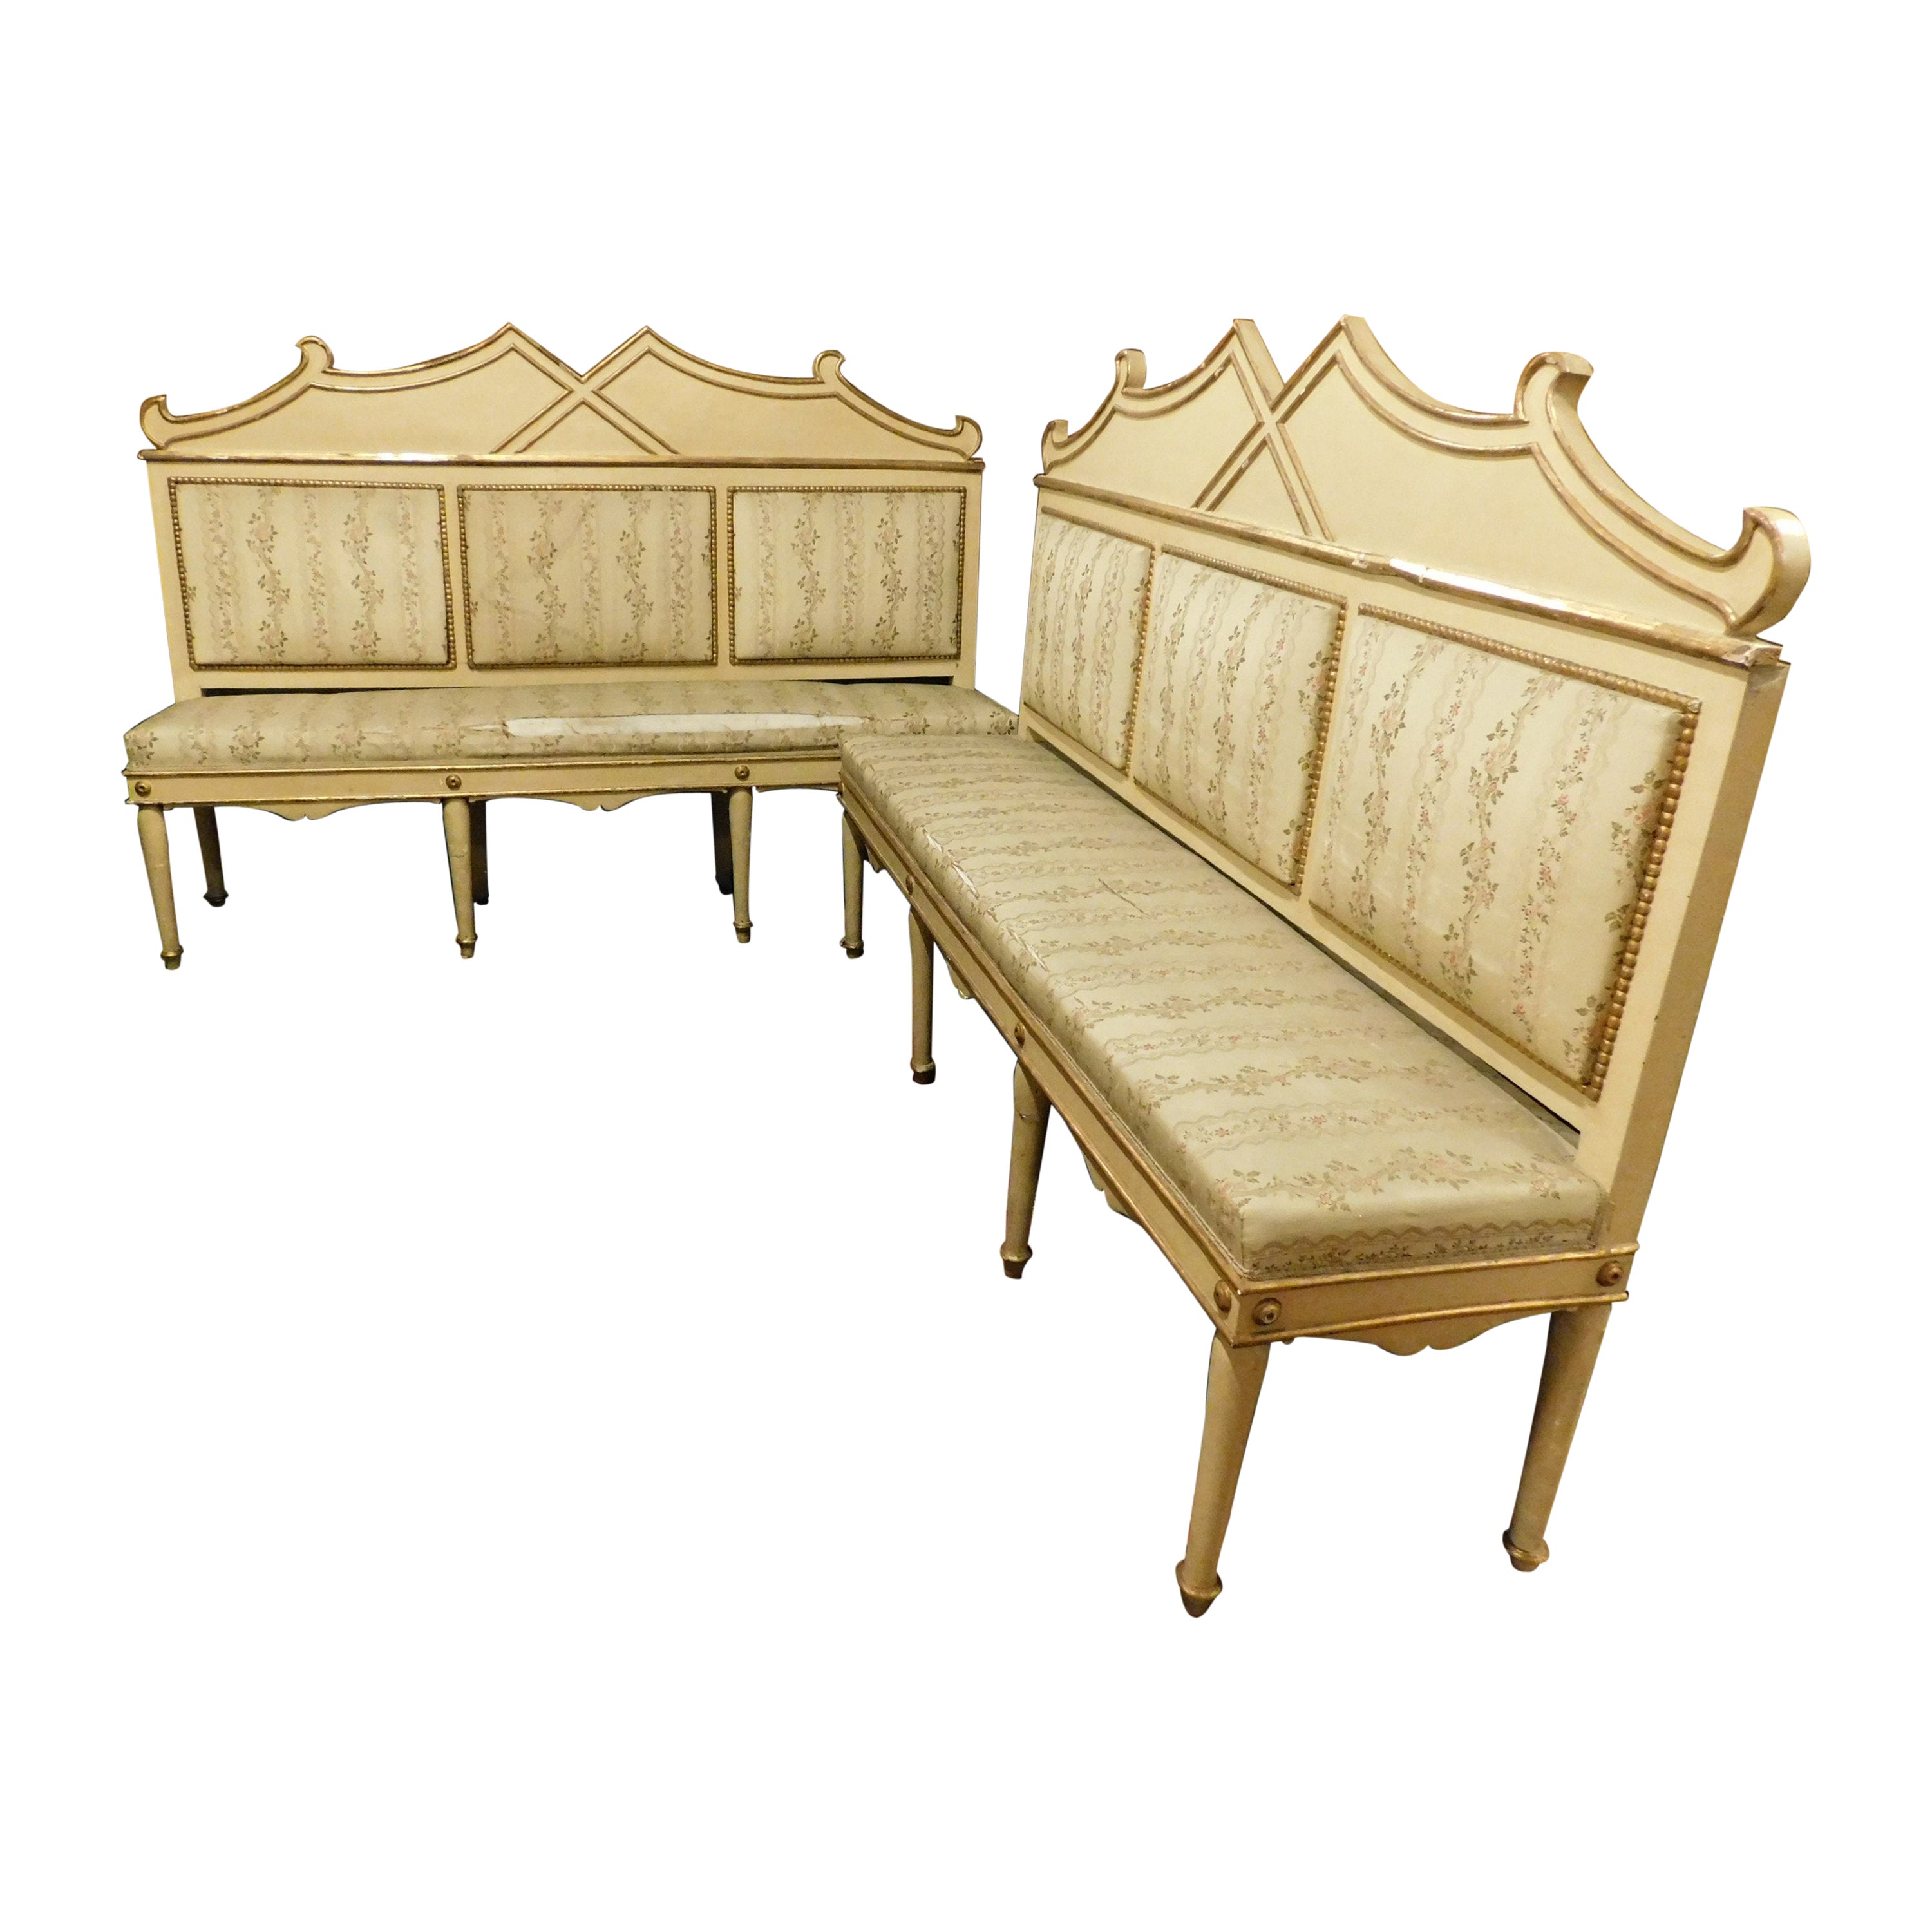 Pair of Vintage Lacquered and Gilded Benches, Early 20th Century, Italy For Sale